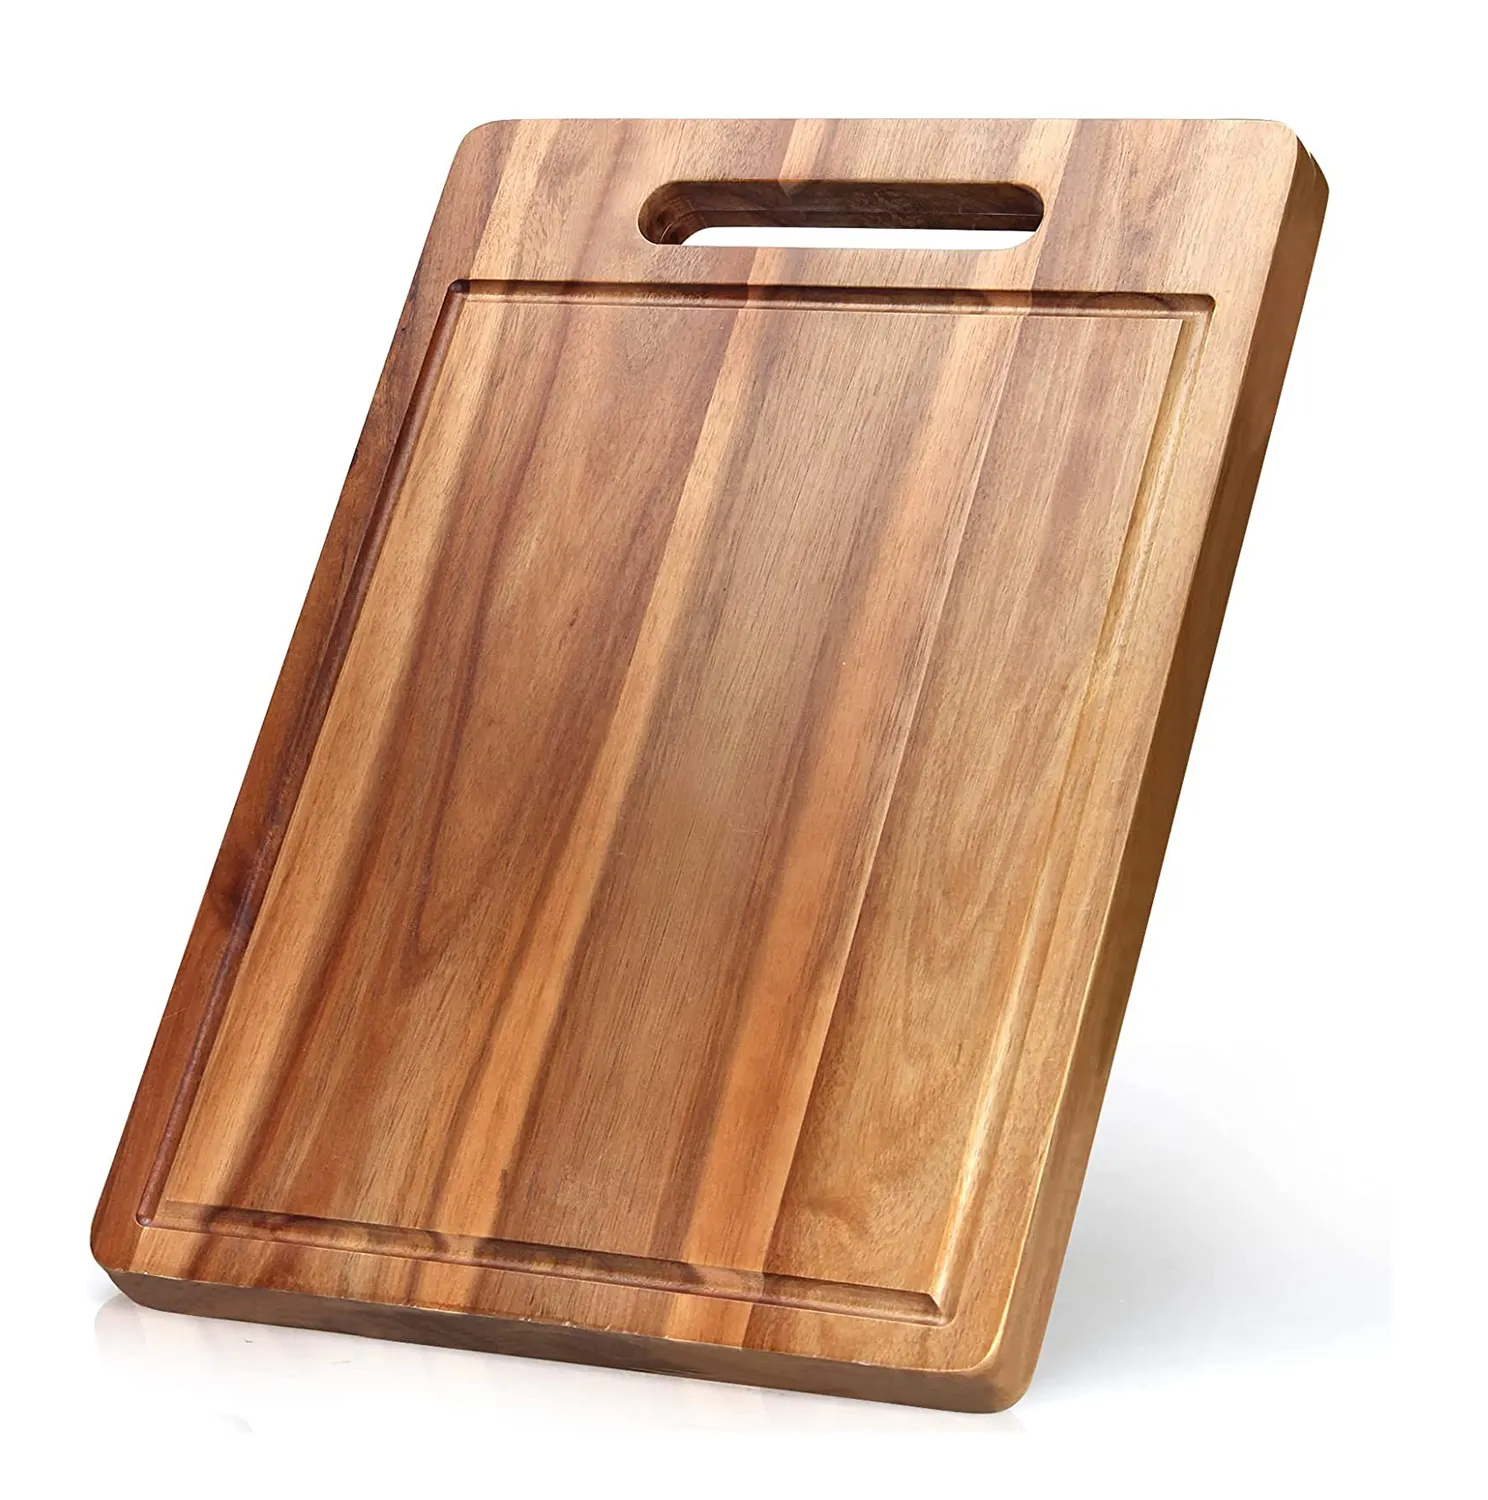 Best Selling Wood Kitchen Cutting Board Personalized Chopping Block New Arrival Chopping Board Cutting Board for Kitchenware